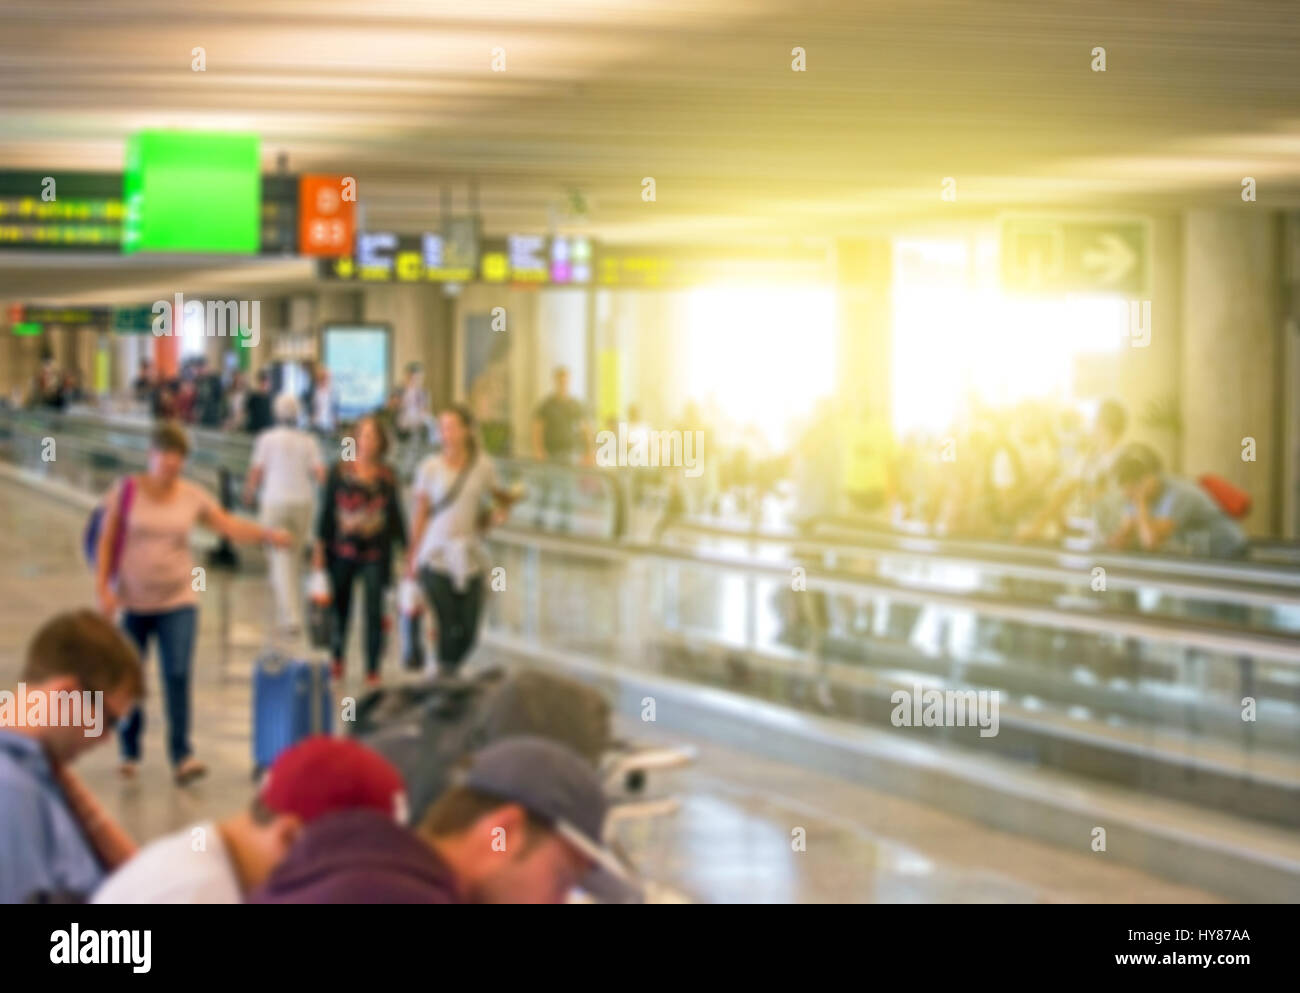 Passenger terminal inside the airport. Blurred image. Suitable for background. Stock Photo